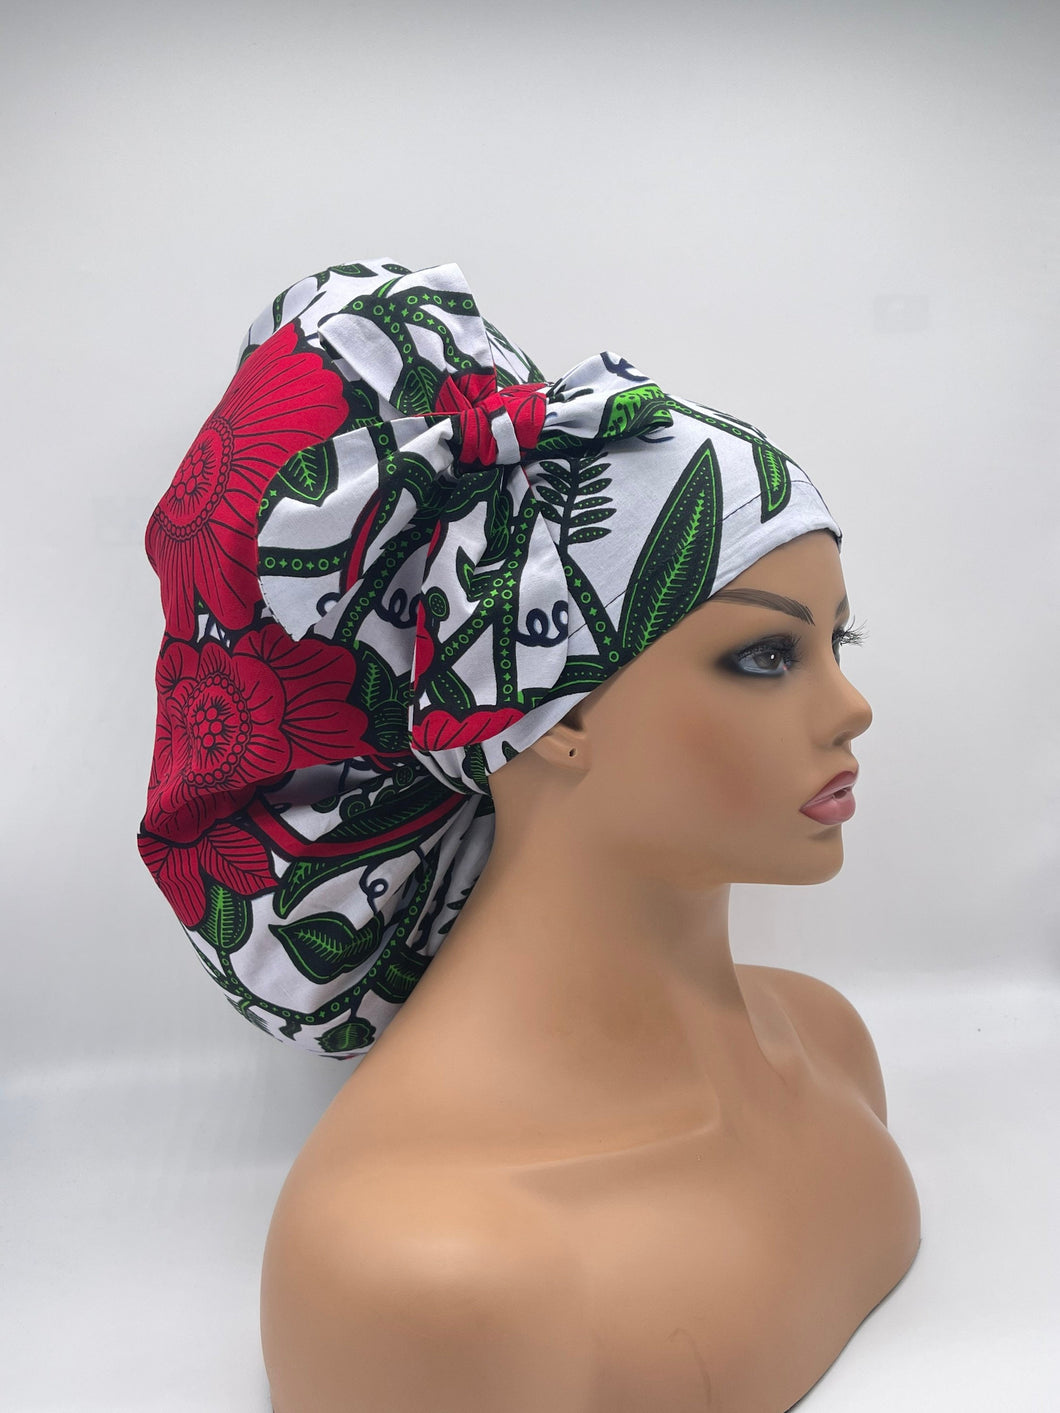 Adjustable 2XL JUMBO PONY SCRUB Cap, White Green Red cotton fabric surgical nursing hat satin lining option for Extra long/thick Hair/Locs